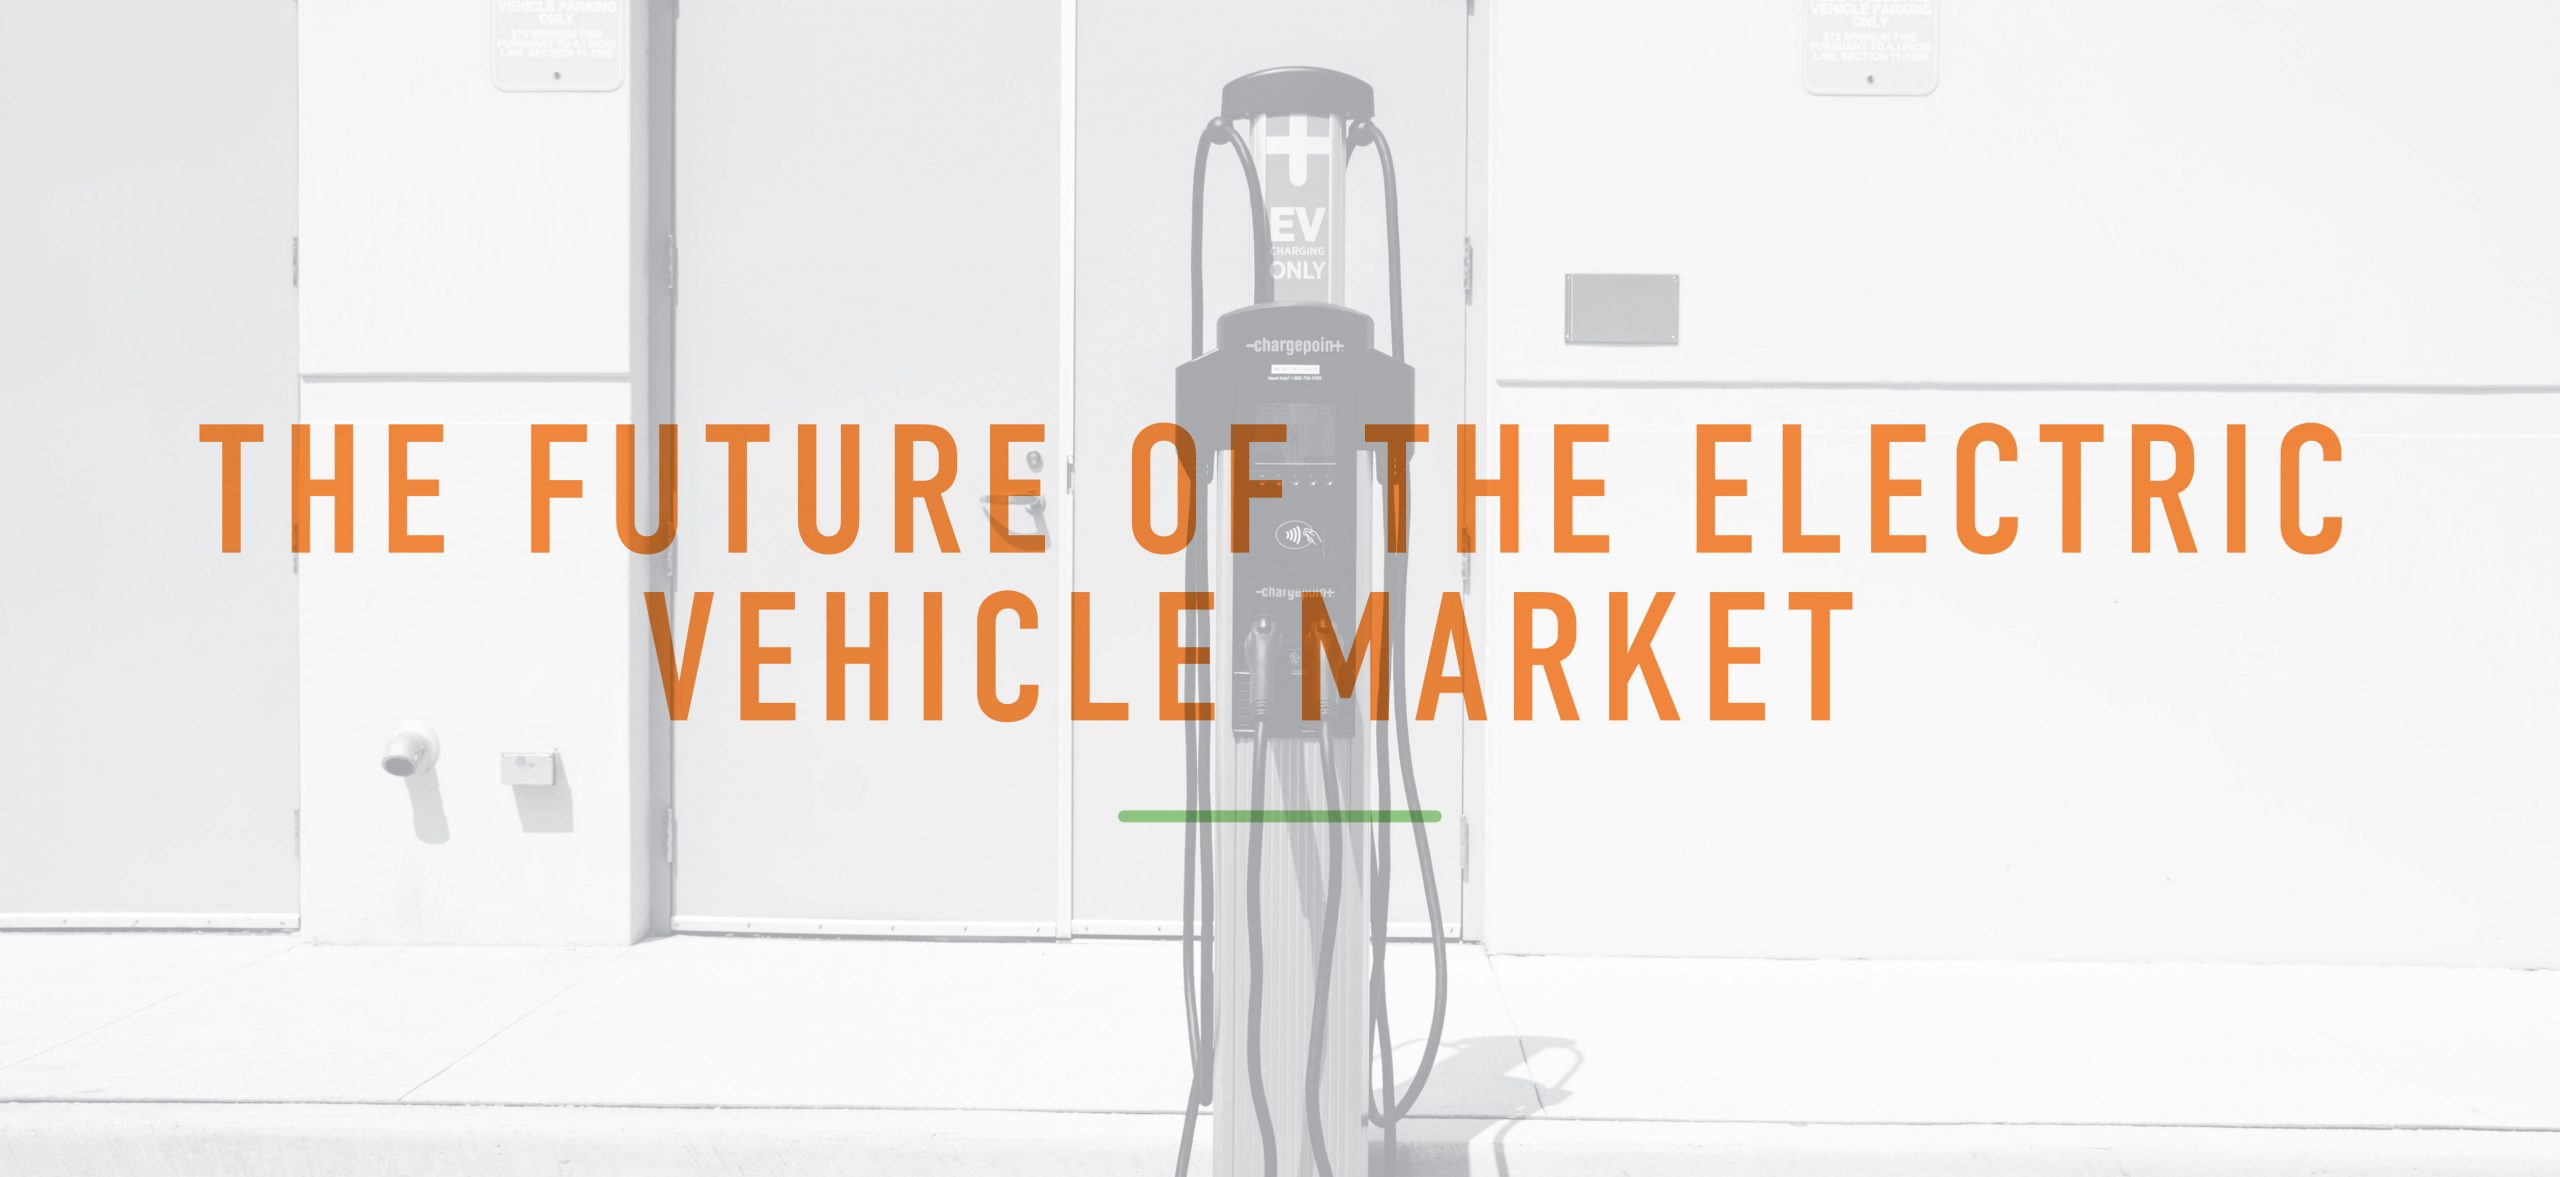 Infrastructure Needs Grow with Electric Vehicle Popularity